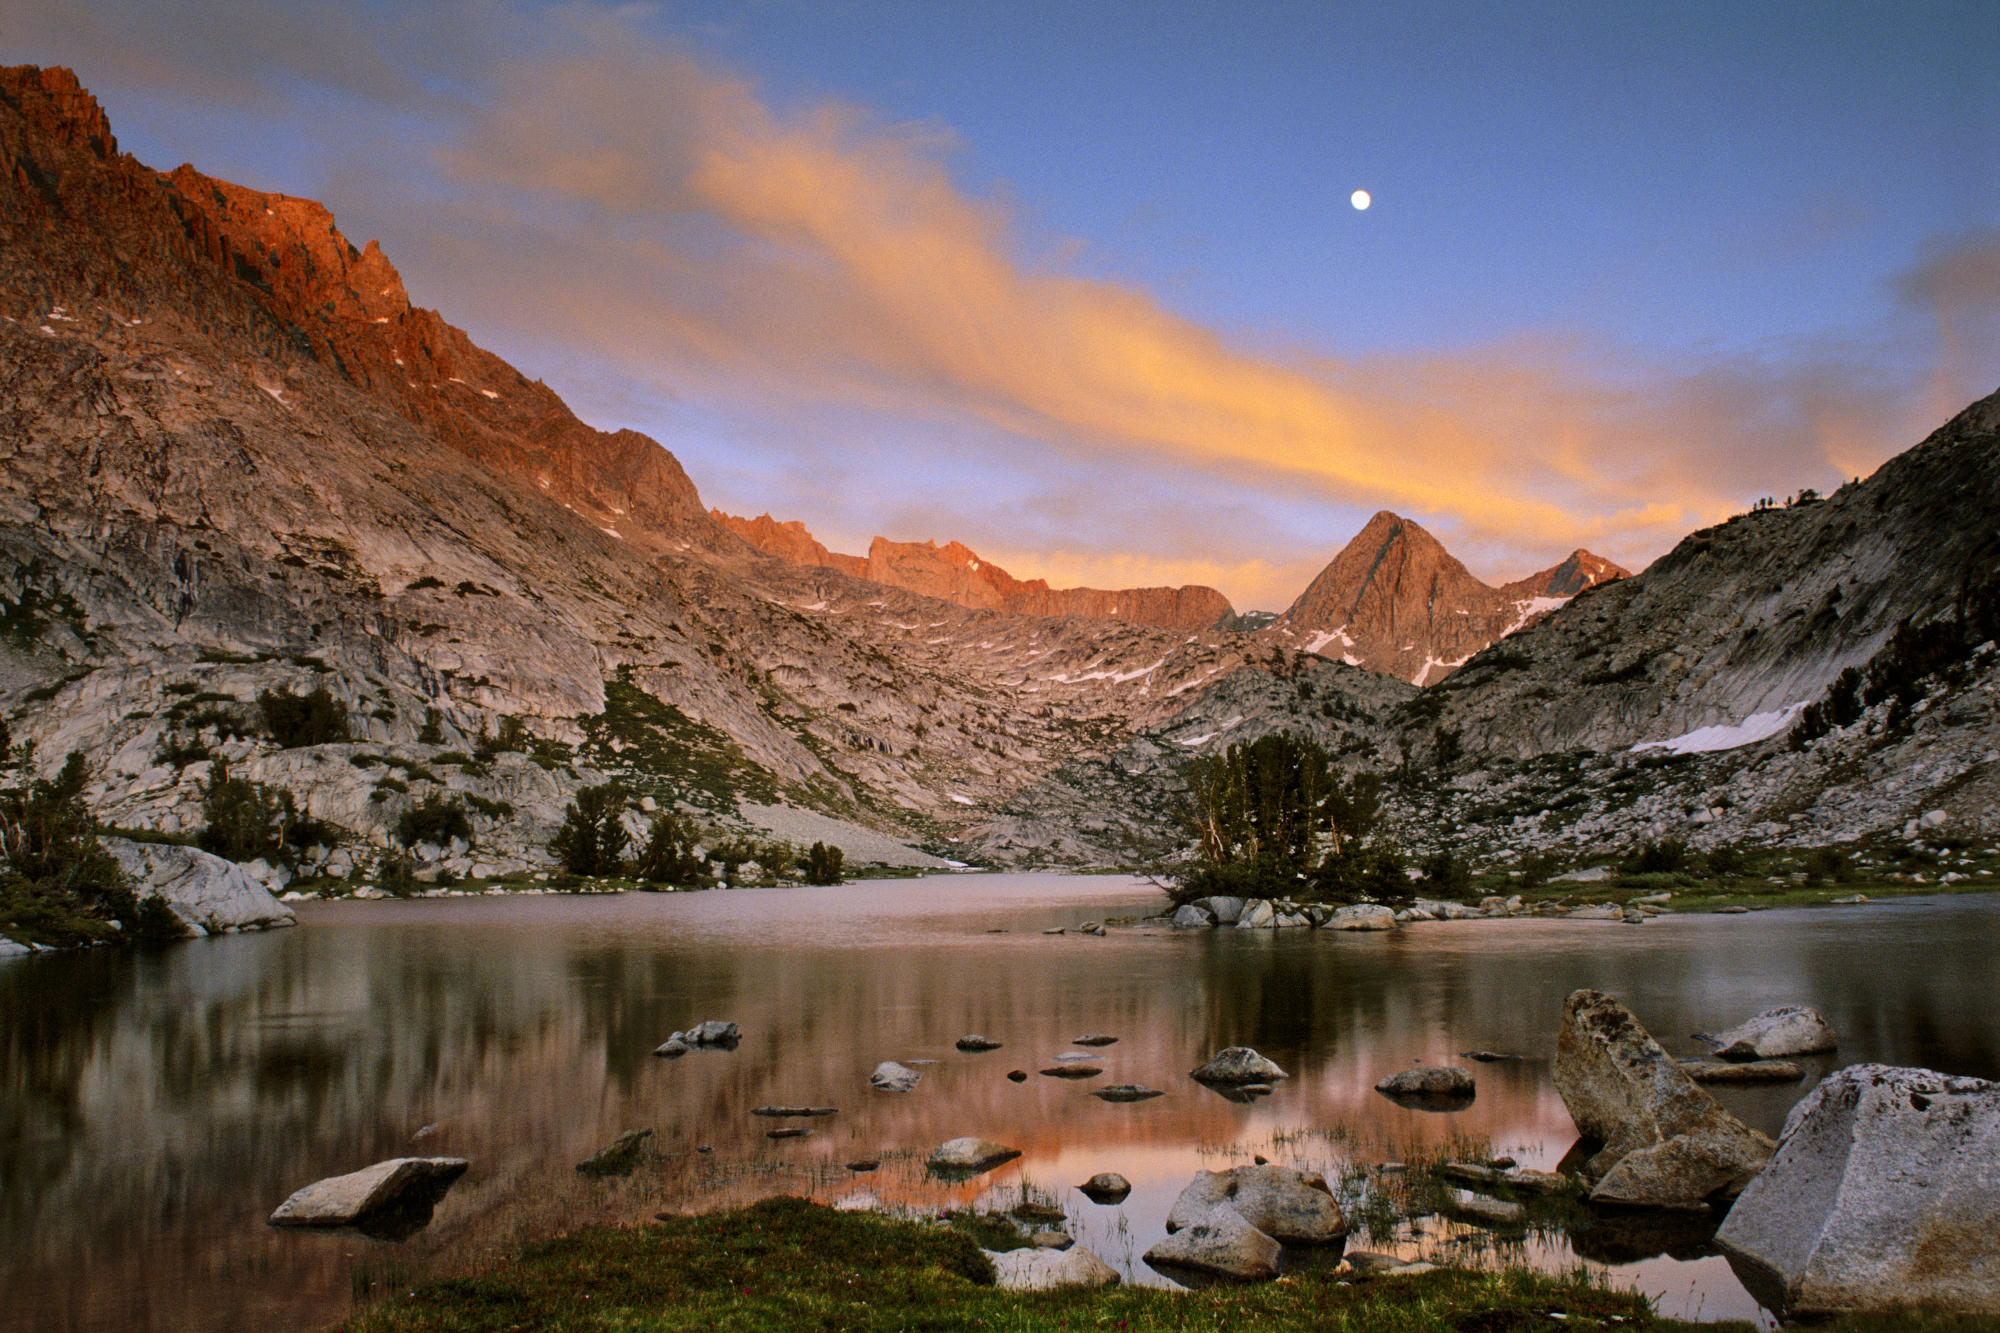 Sunset Over A Mountain Lake In The High Sierra | WallpaperGeeks.com